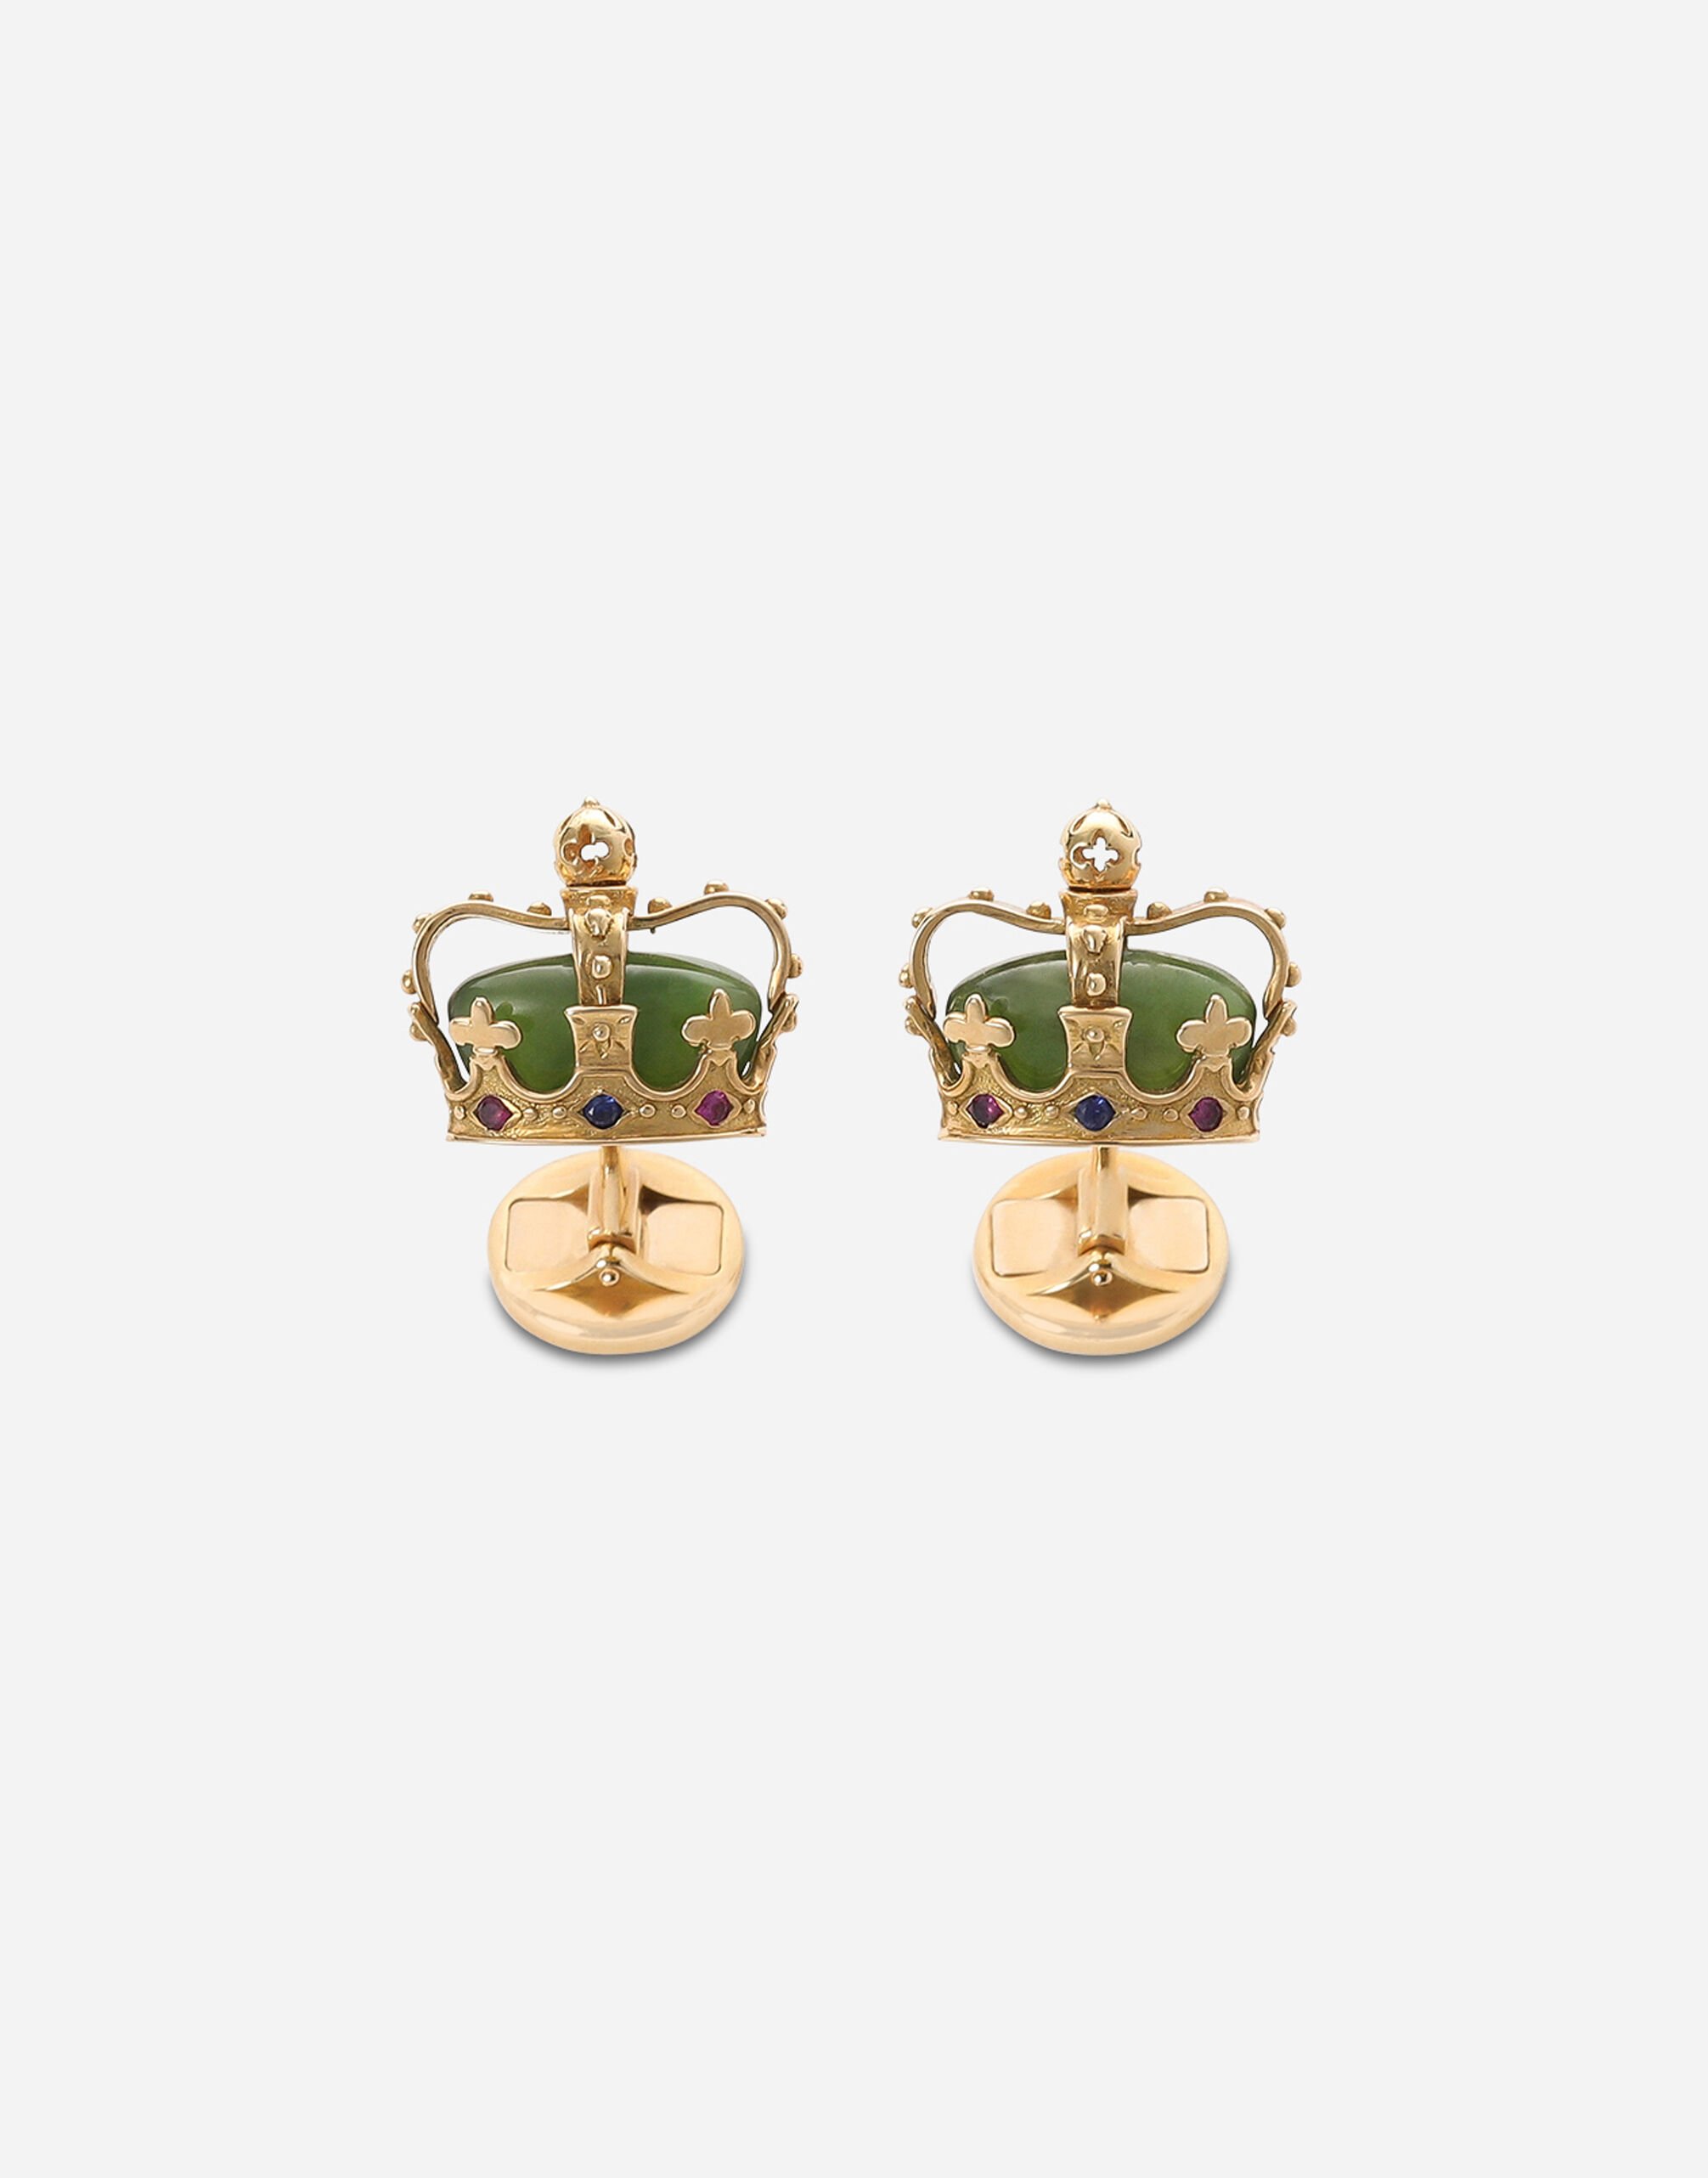 ${brand} Crown yellow gold cufflinks with green jades ${colorDescription} ${masterID}